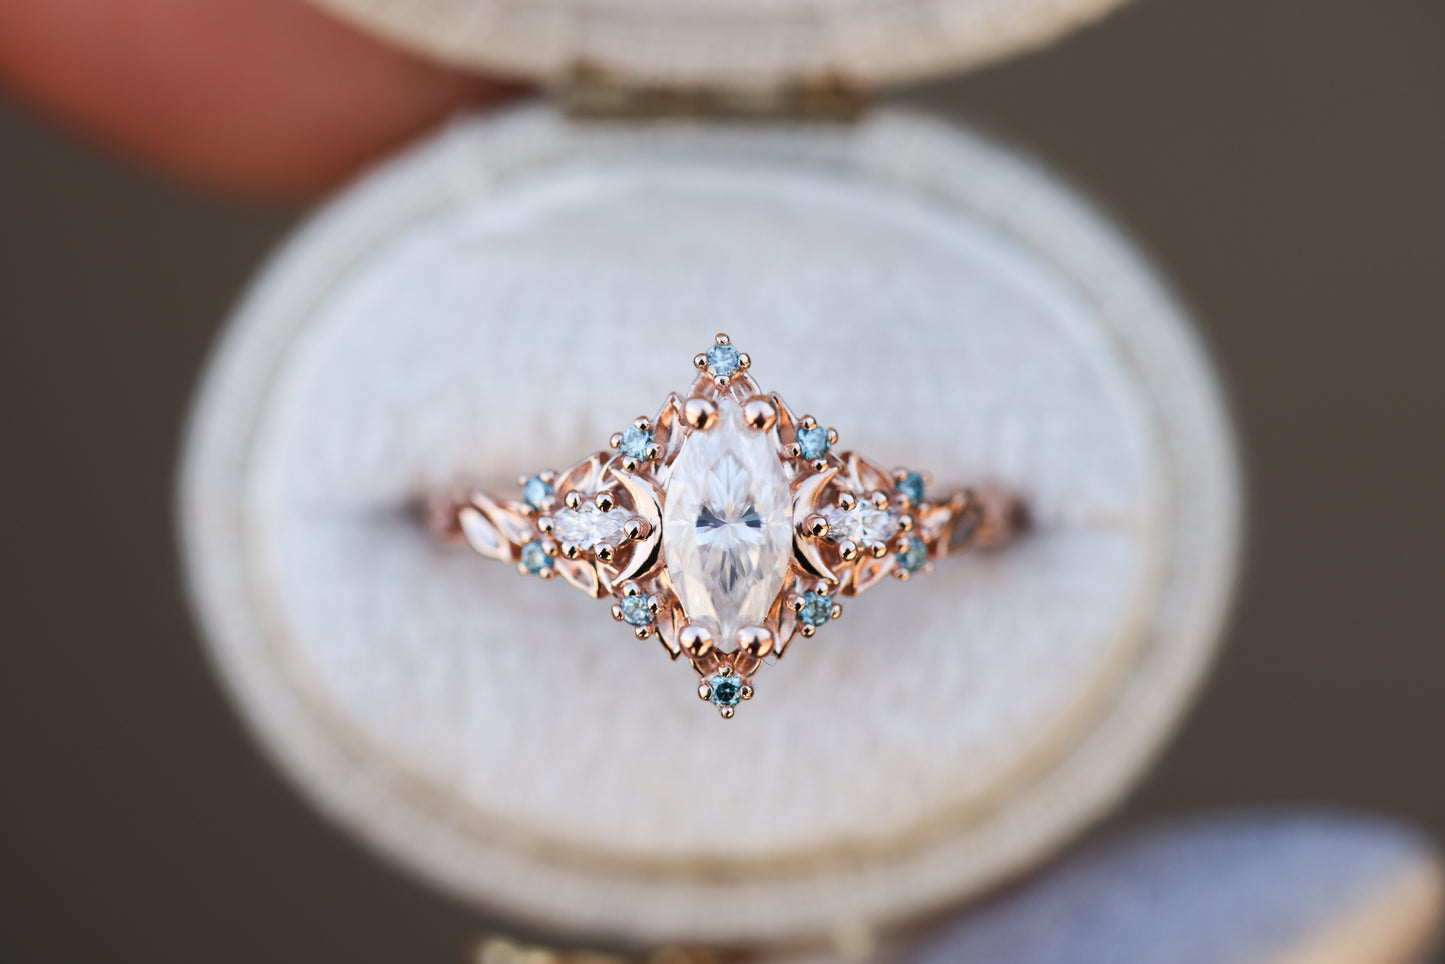 Briar moon with marquise moissanite center and aqua diamond accents